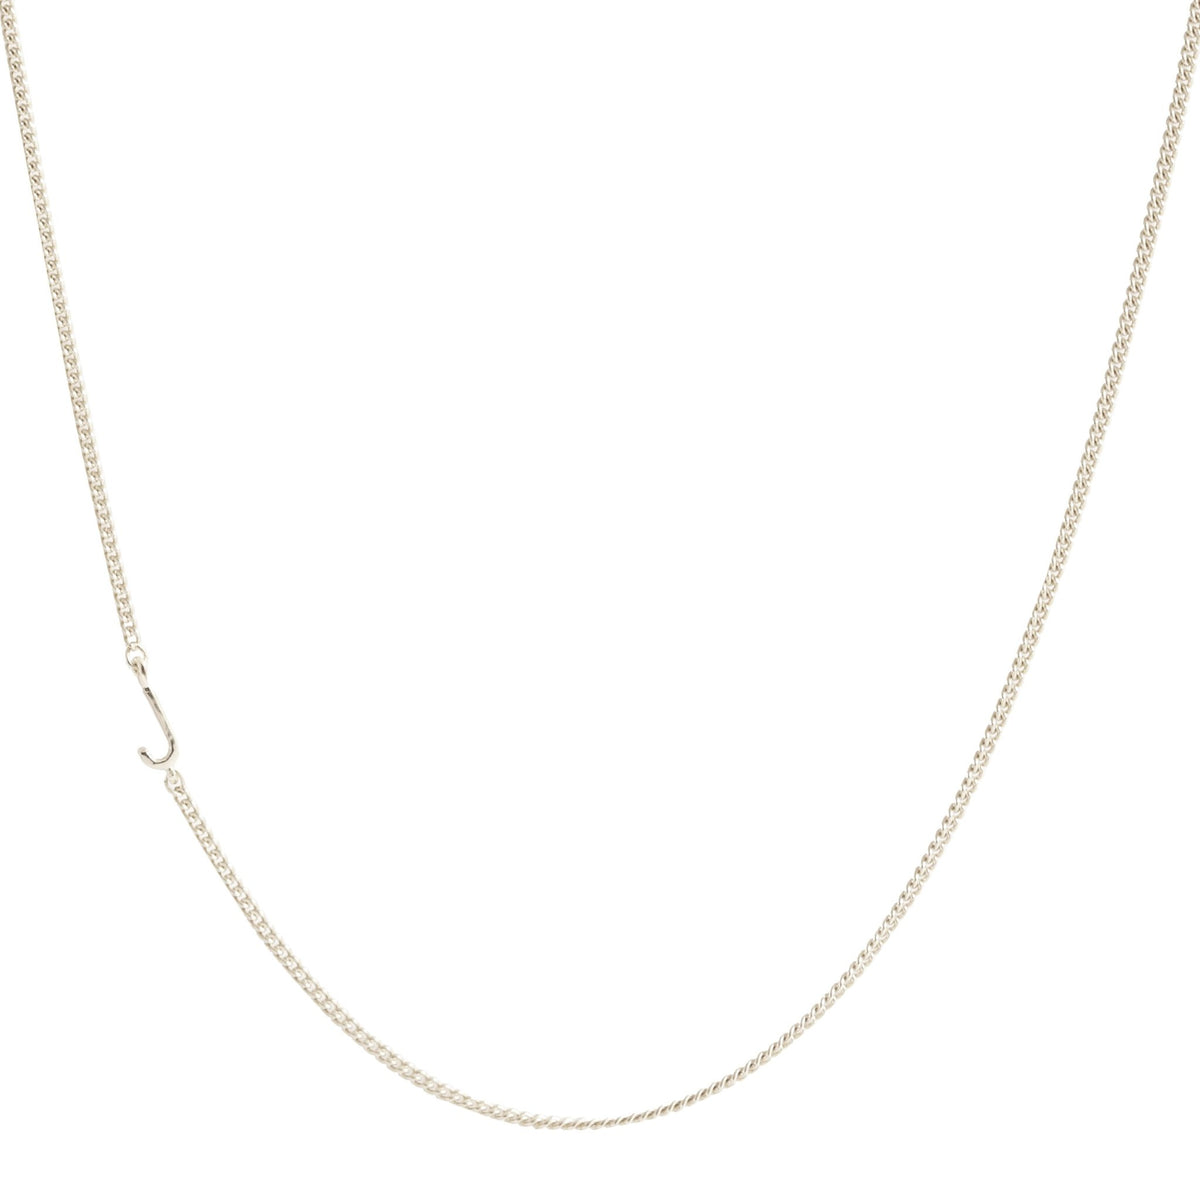 NOTABLE OFFSET INITIAL NECKLACE - J - GOLD, ROSE GOLD, OR SILVER - SO PRETTY CARA COTTER